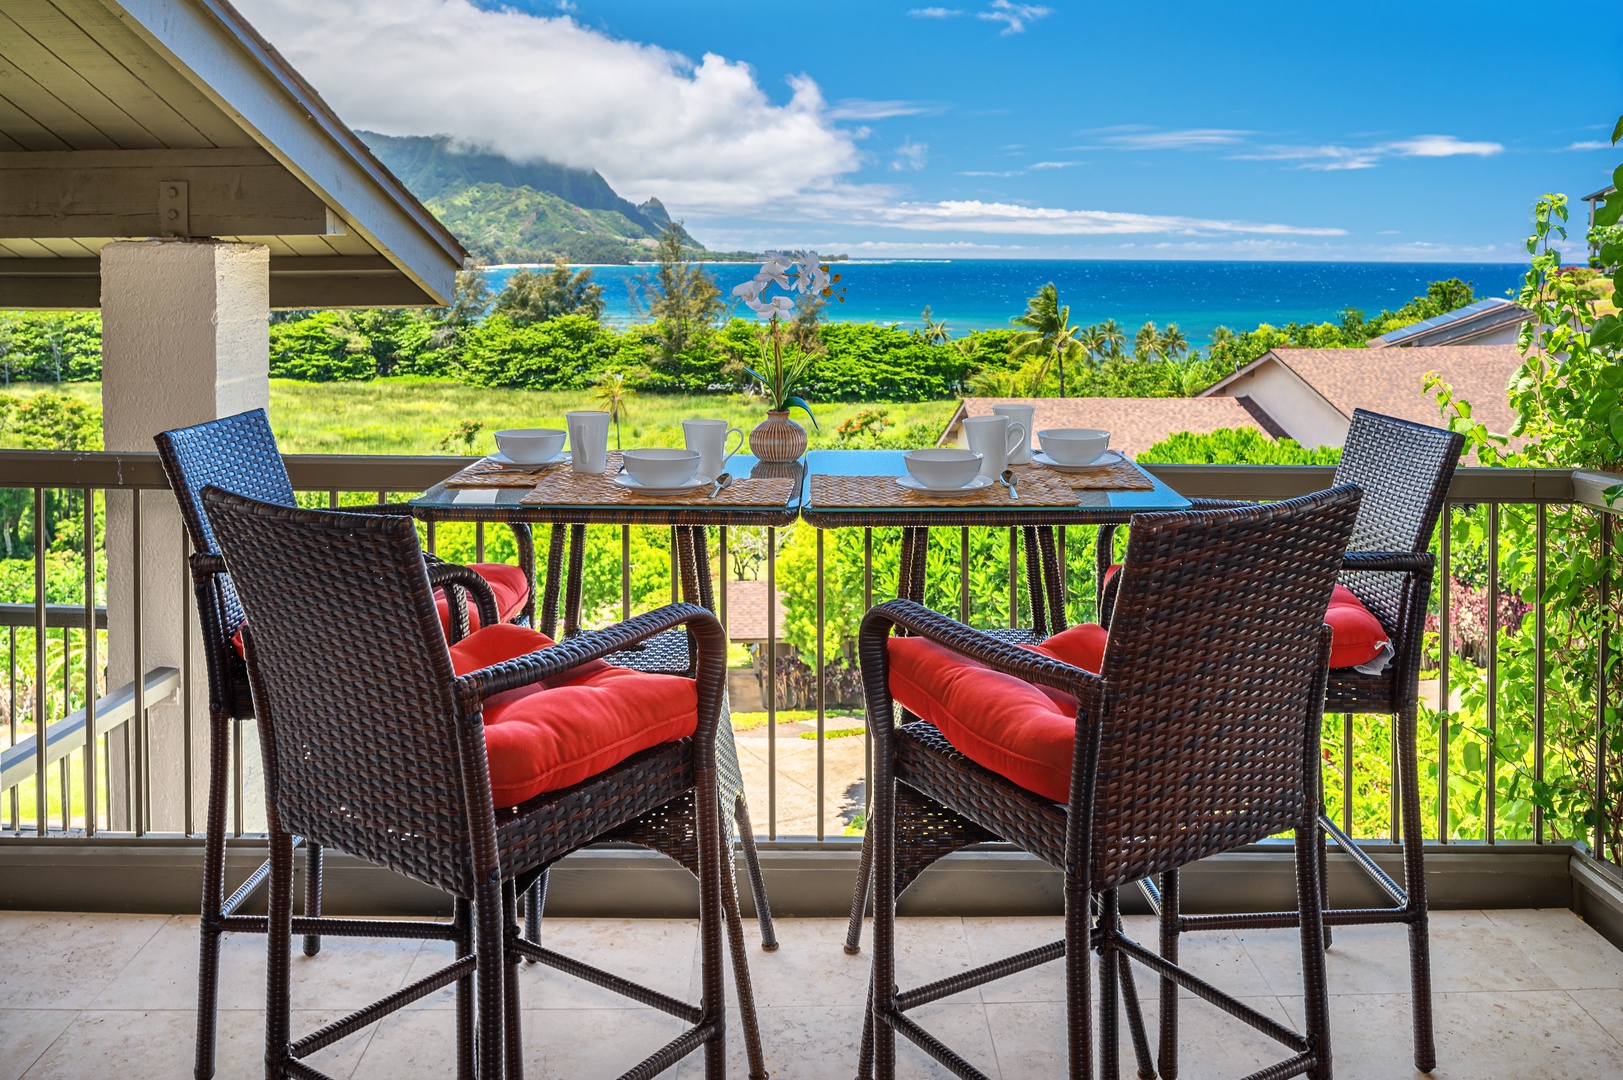 Princeville Vacation Rentals, Hanalei Bay Resort 7307/08 - Outdoor dining with ocean and Bali Hai views is unbeatable!